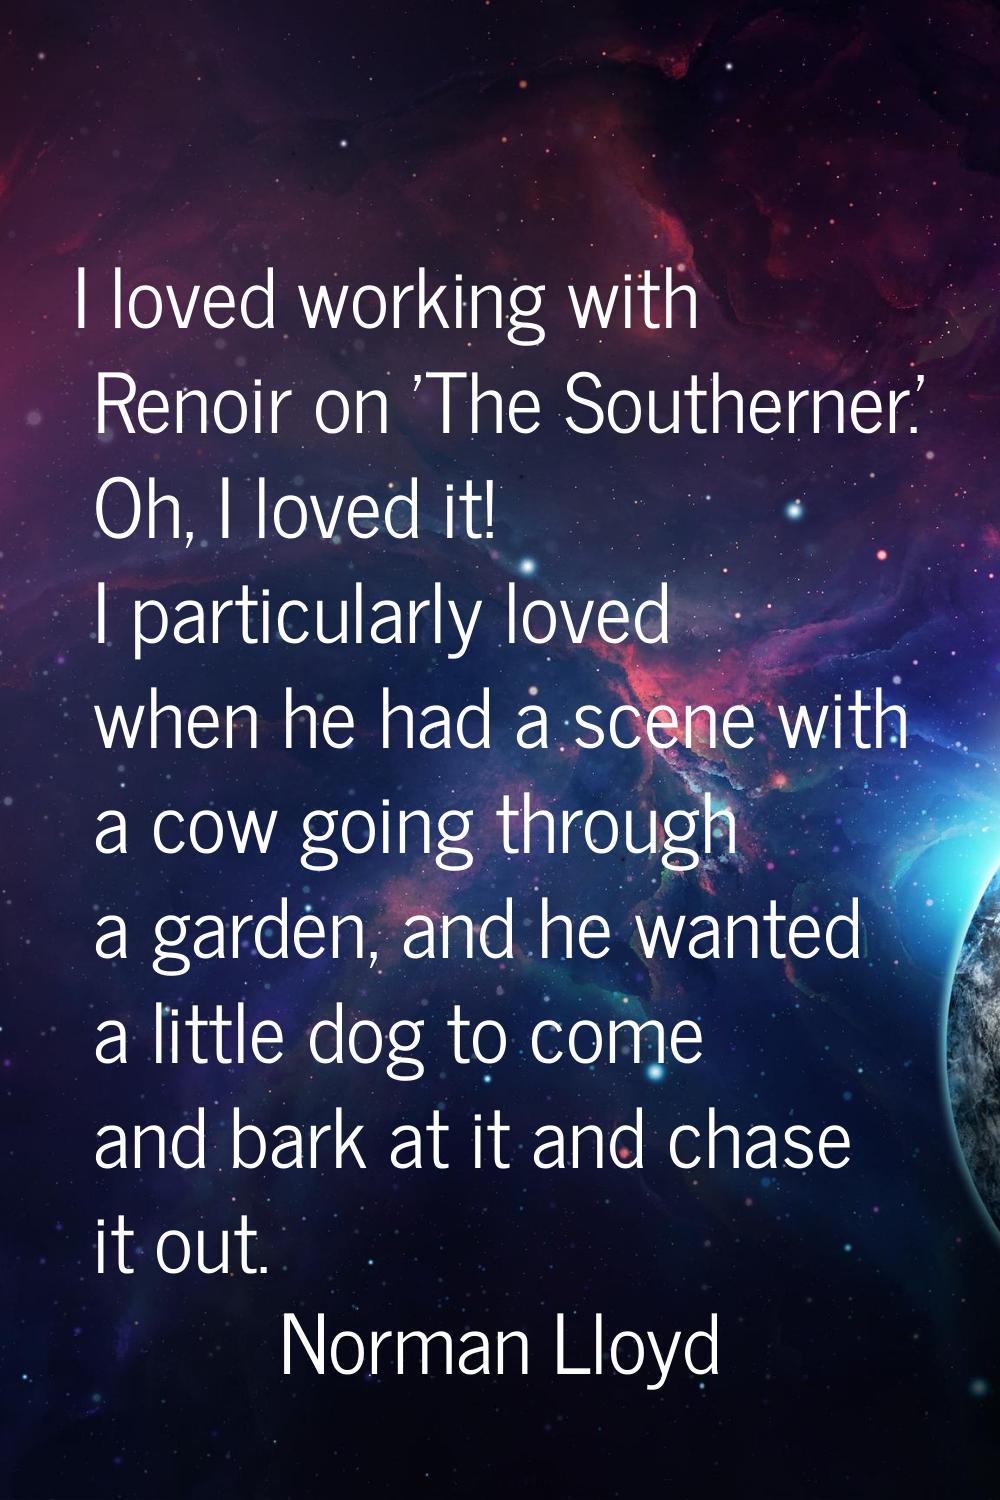 I loved working with Renoir on 'The Southerner.' Oh, I loved it! I particularly loved when he had a